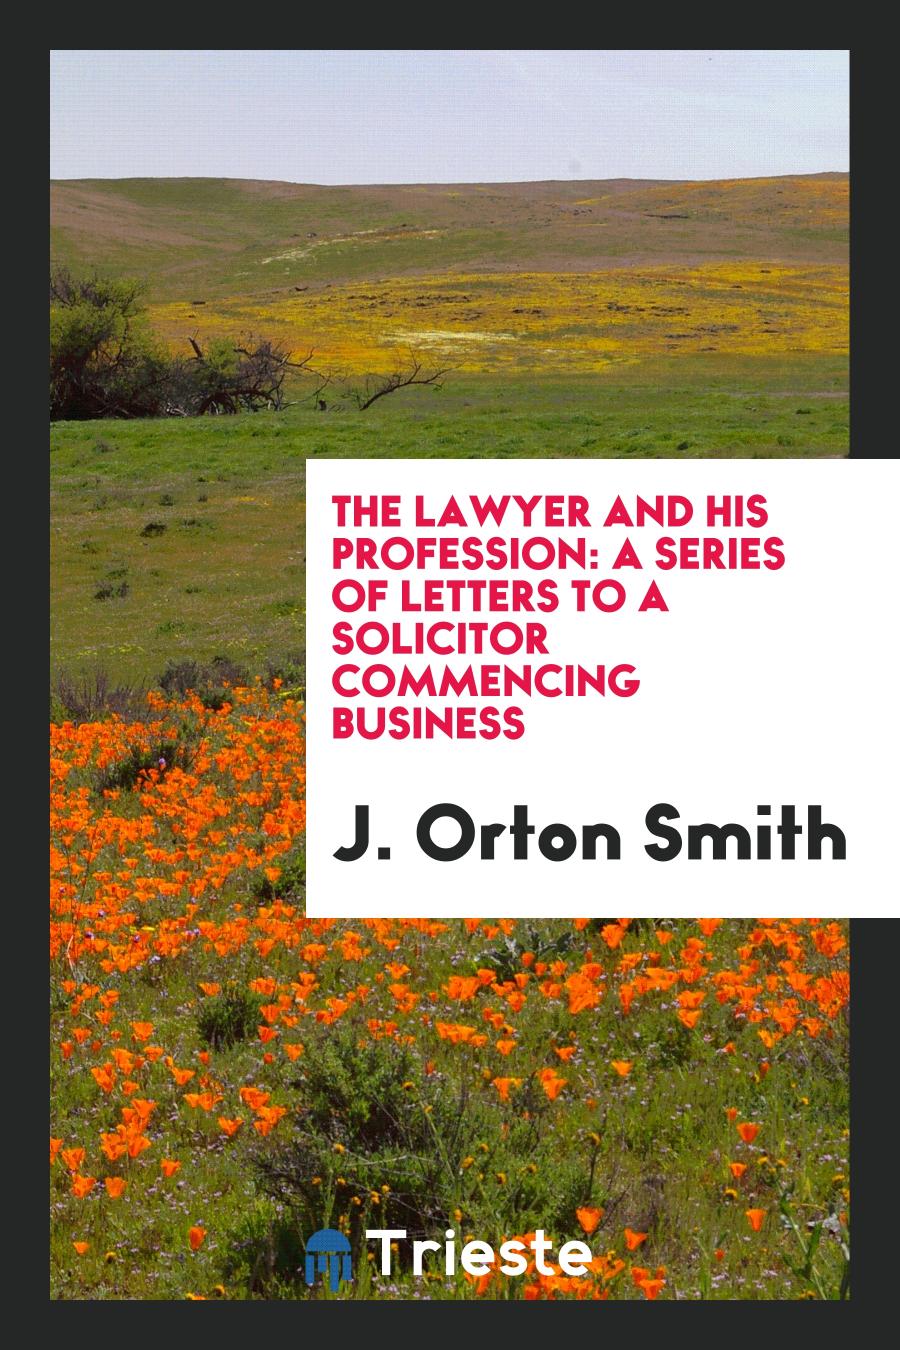 The Lawyer and His Profession: A Series of Letters to a Solicitor Commencing Business